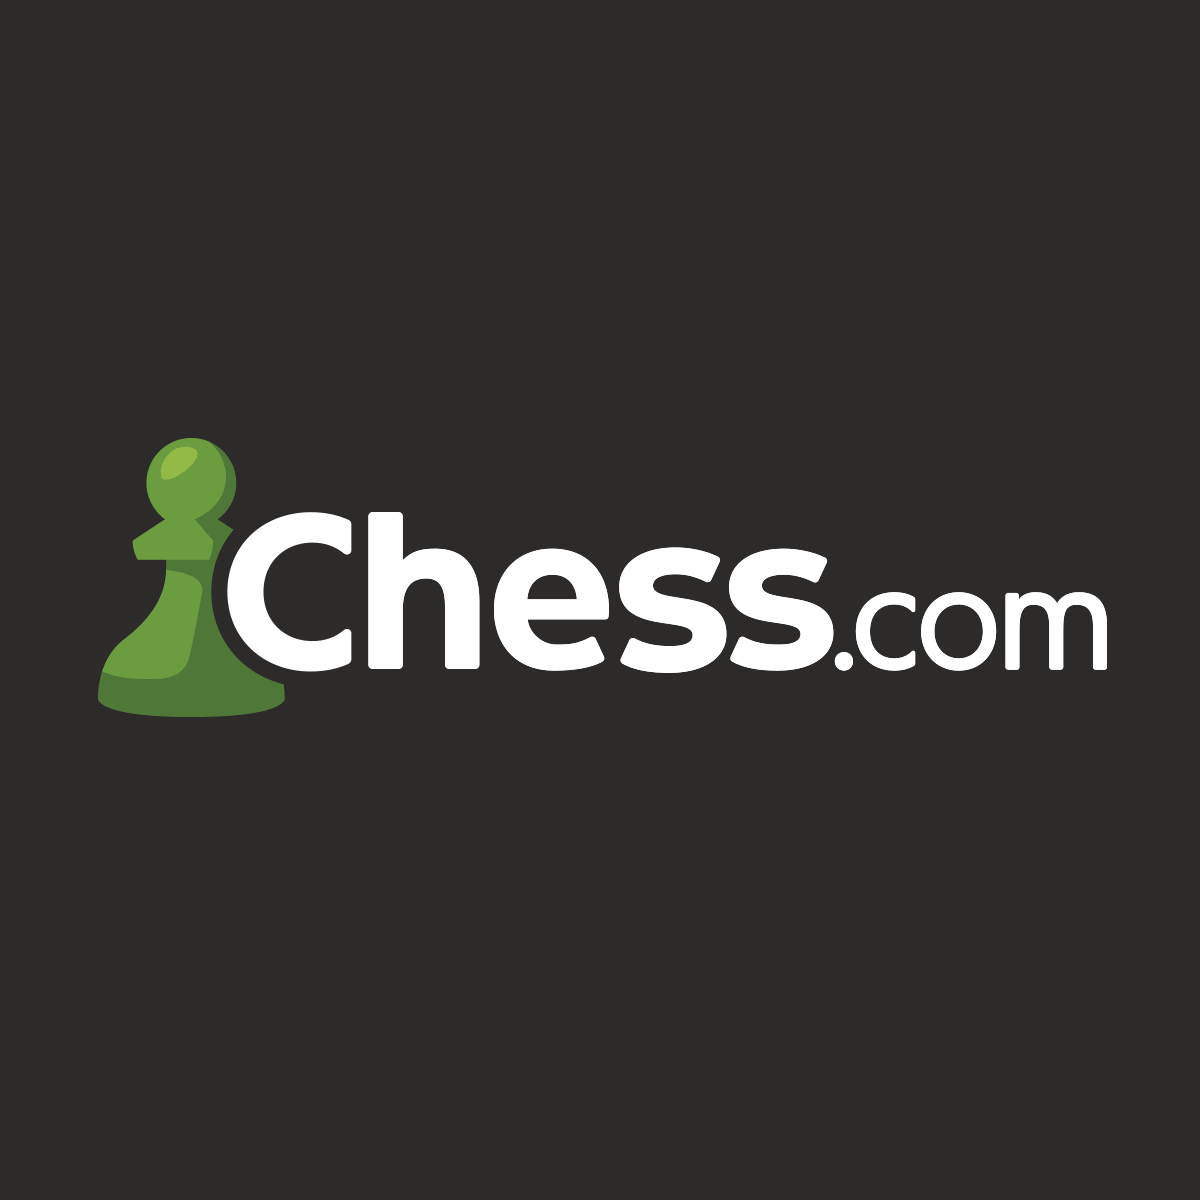 How good can you get at chess by just completing puzzles, (specifically the  training on Lichess app)? - Quora